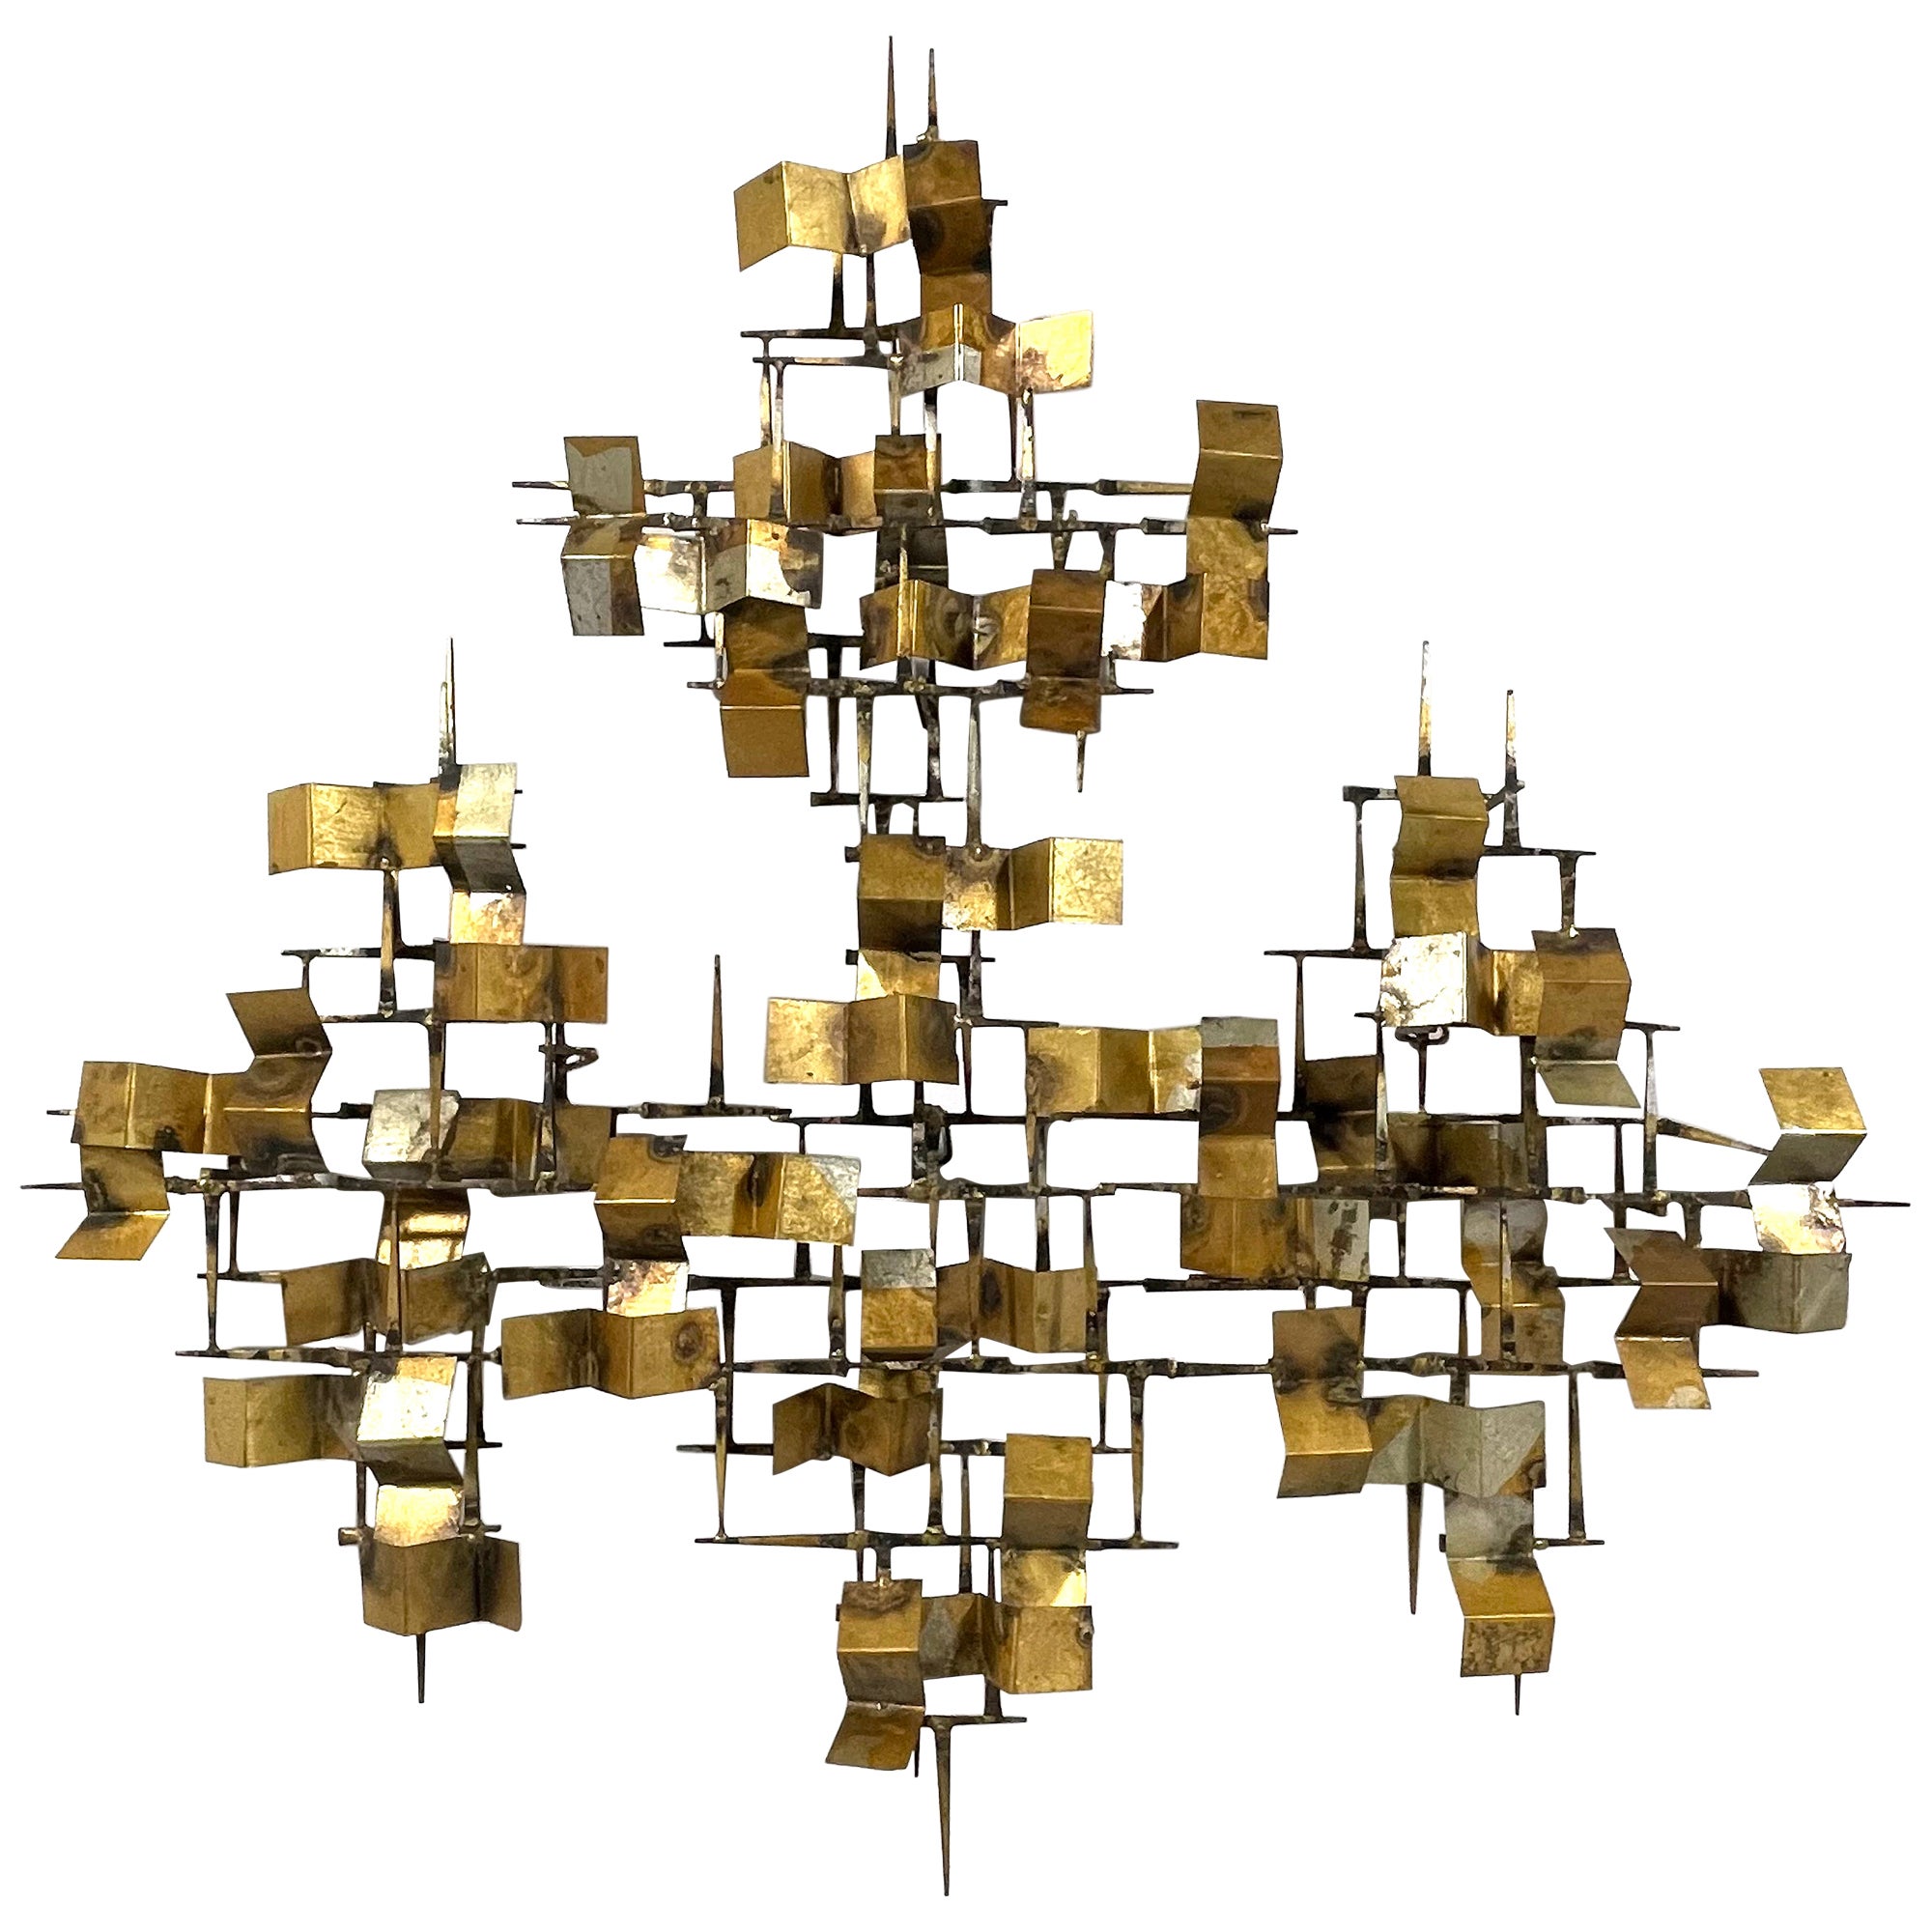 William Bowie "Reflections" Abstract Wall Sculpture